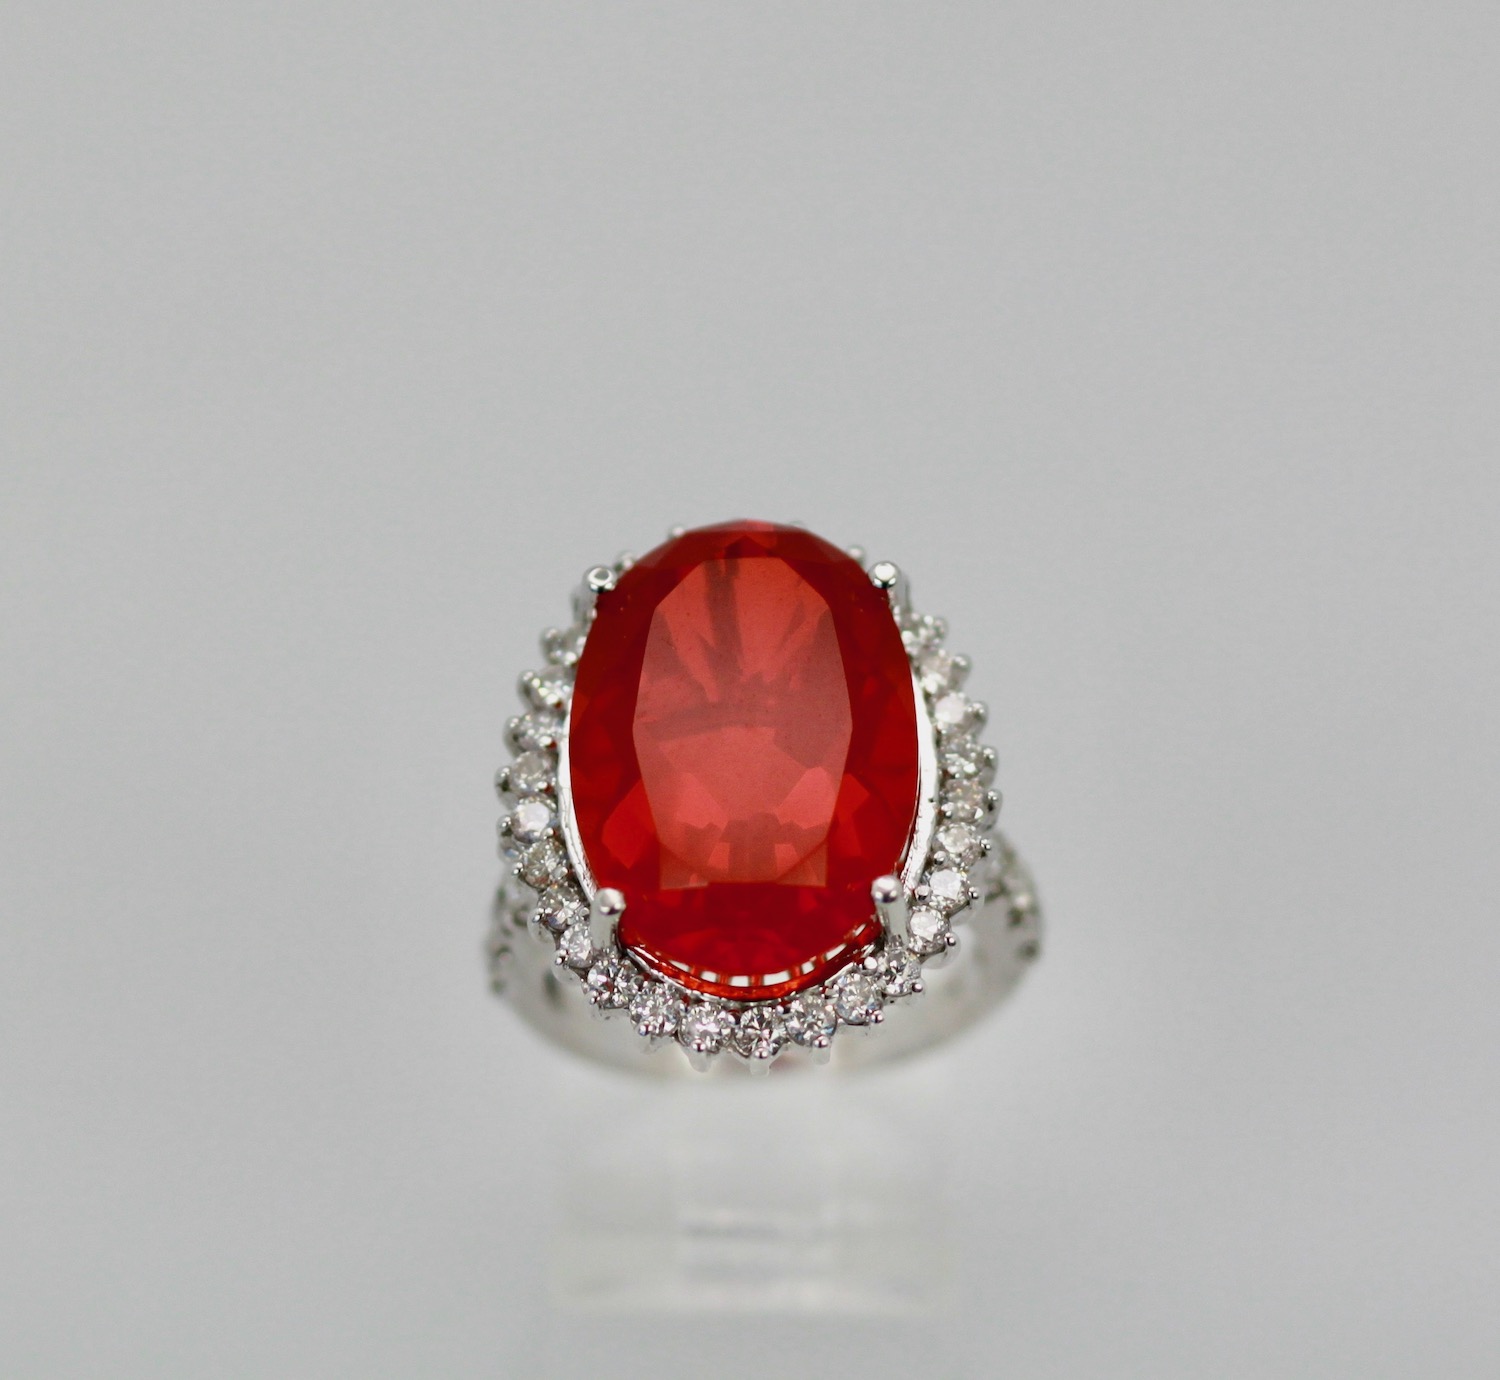 Large Fire Opal ring with Diamond surround – detail